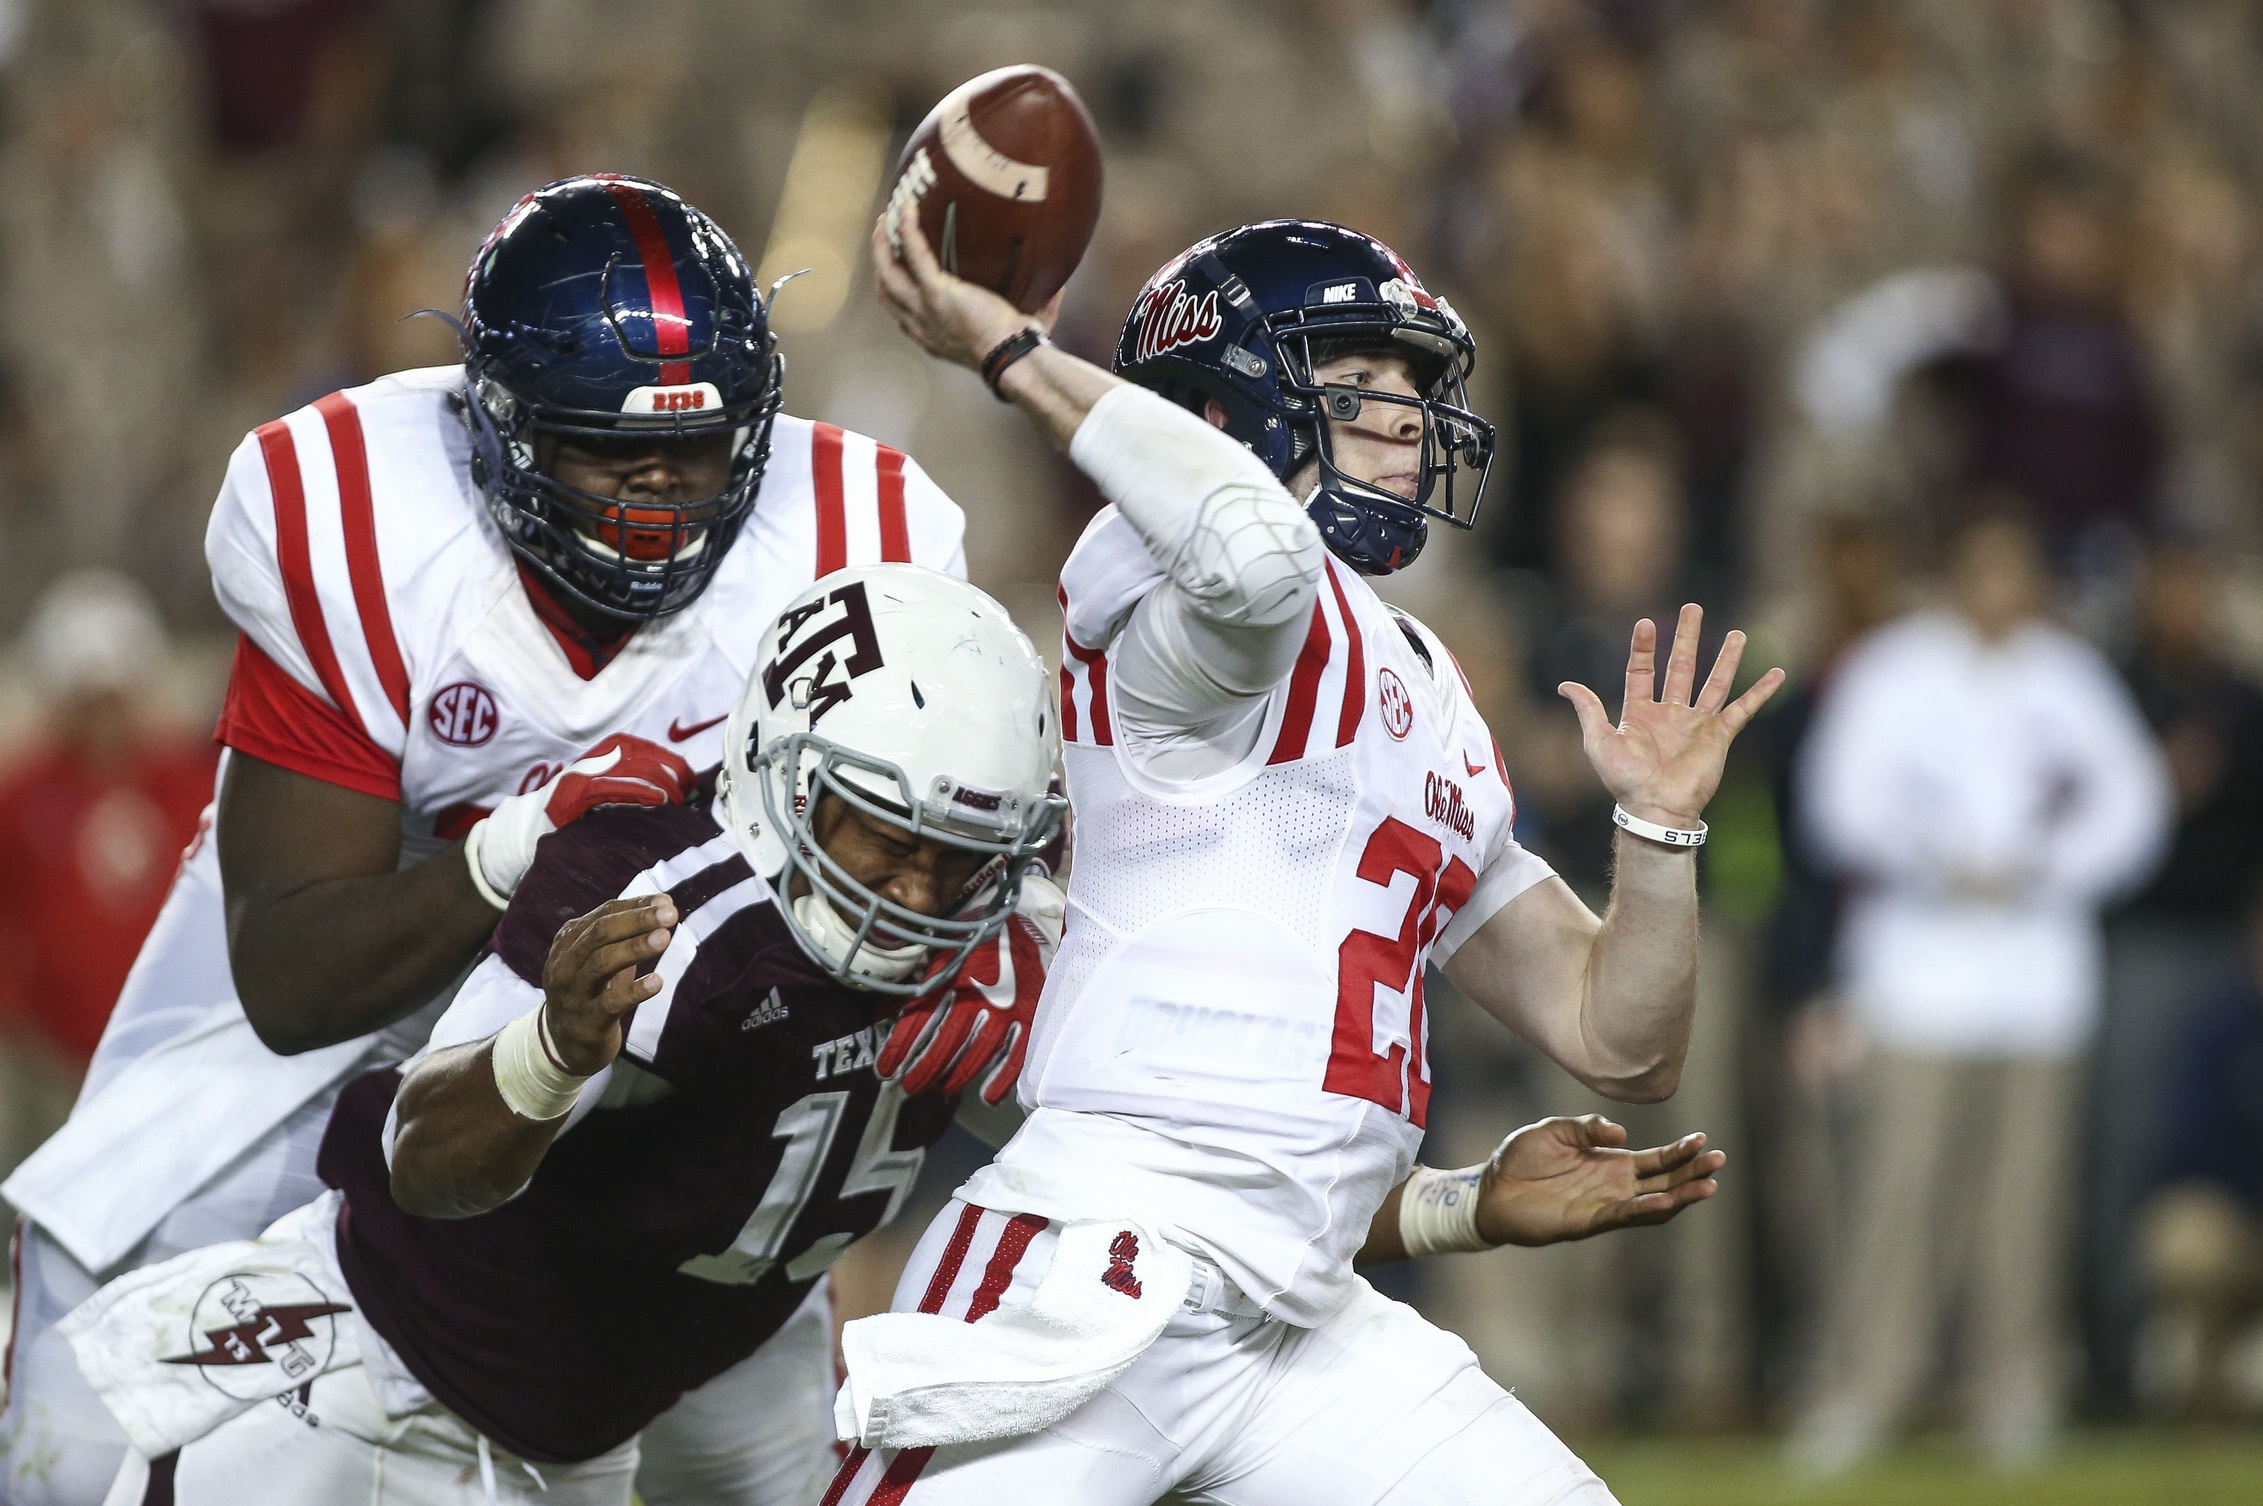 Nov 12, 2016; College Station, TX, USA; Texas A&M Aggies defensive lineman Myles Garrett (15) attempts to sack Mississippi Rebels quarterback Shea Patterson (20) during the second quarter at Kyle Field. Mandatory Credit: Troy Taormina-USA TODAY Sports